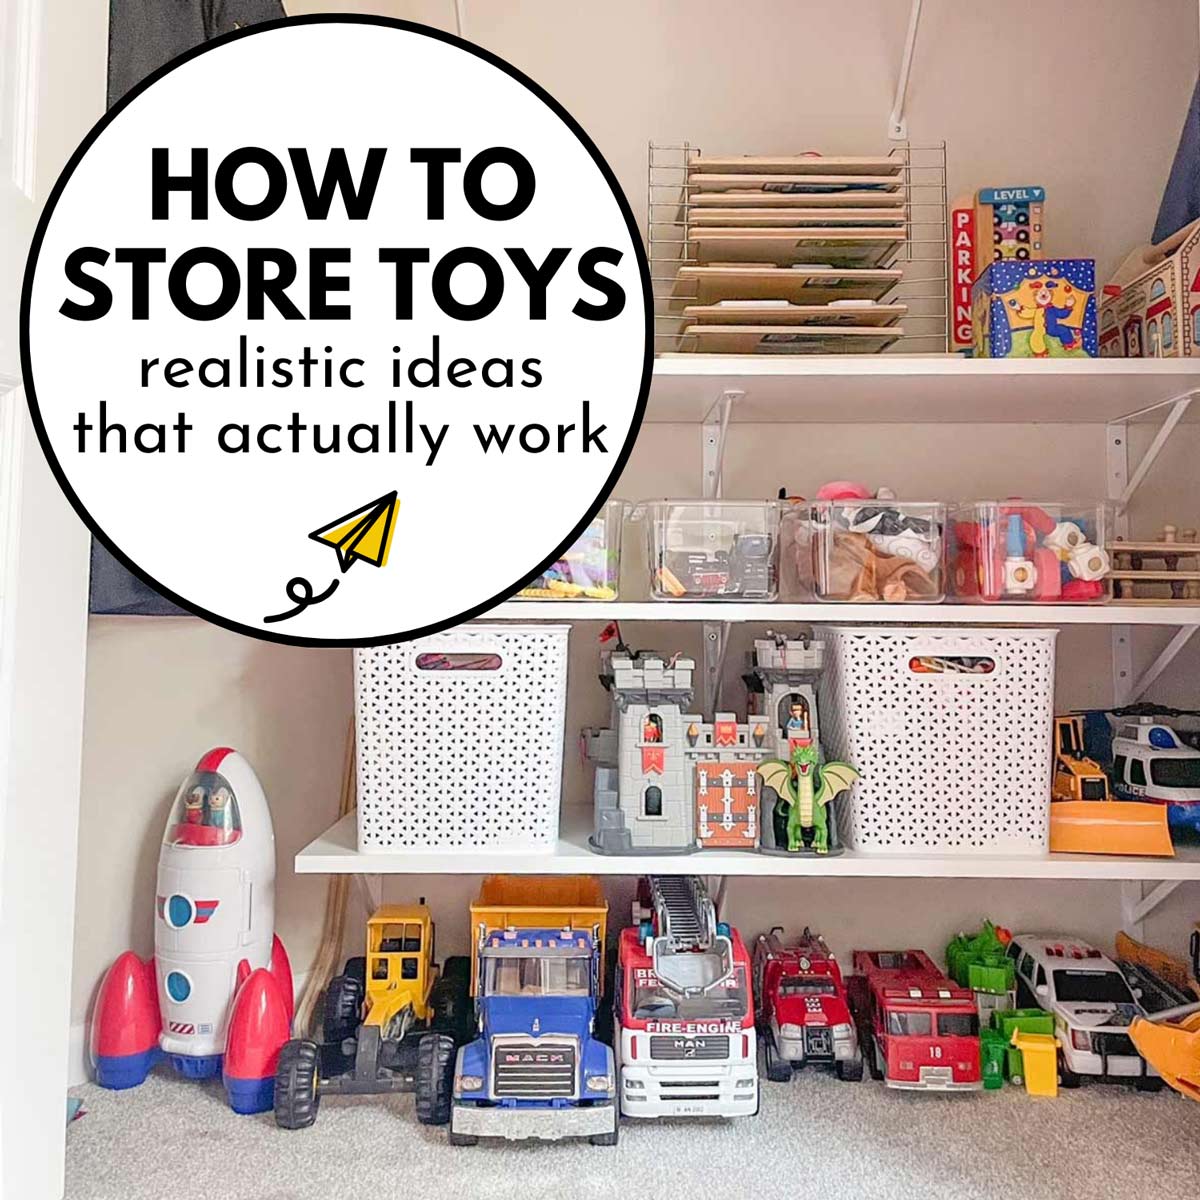 How to store toys: realistic ideas that actually work (image shows a child's organized closet)